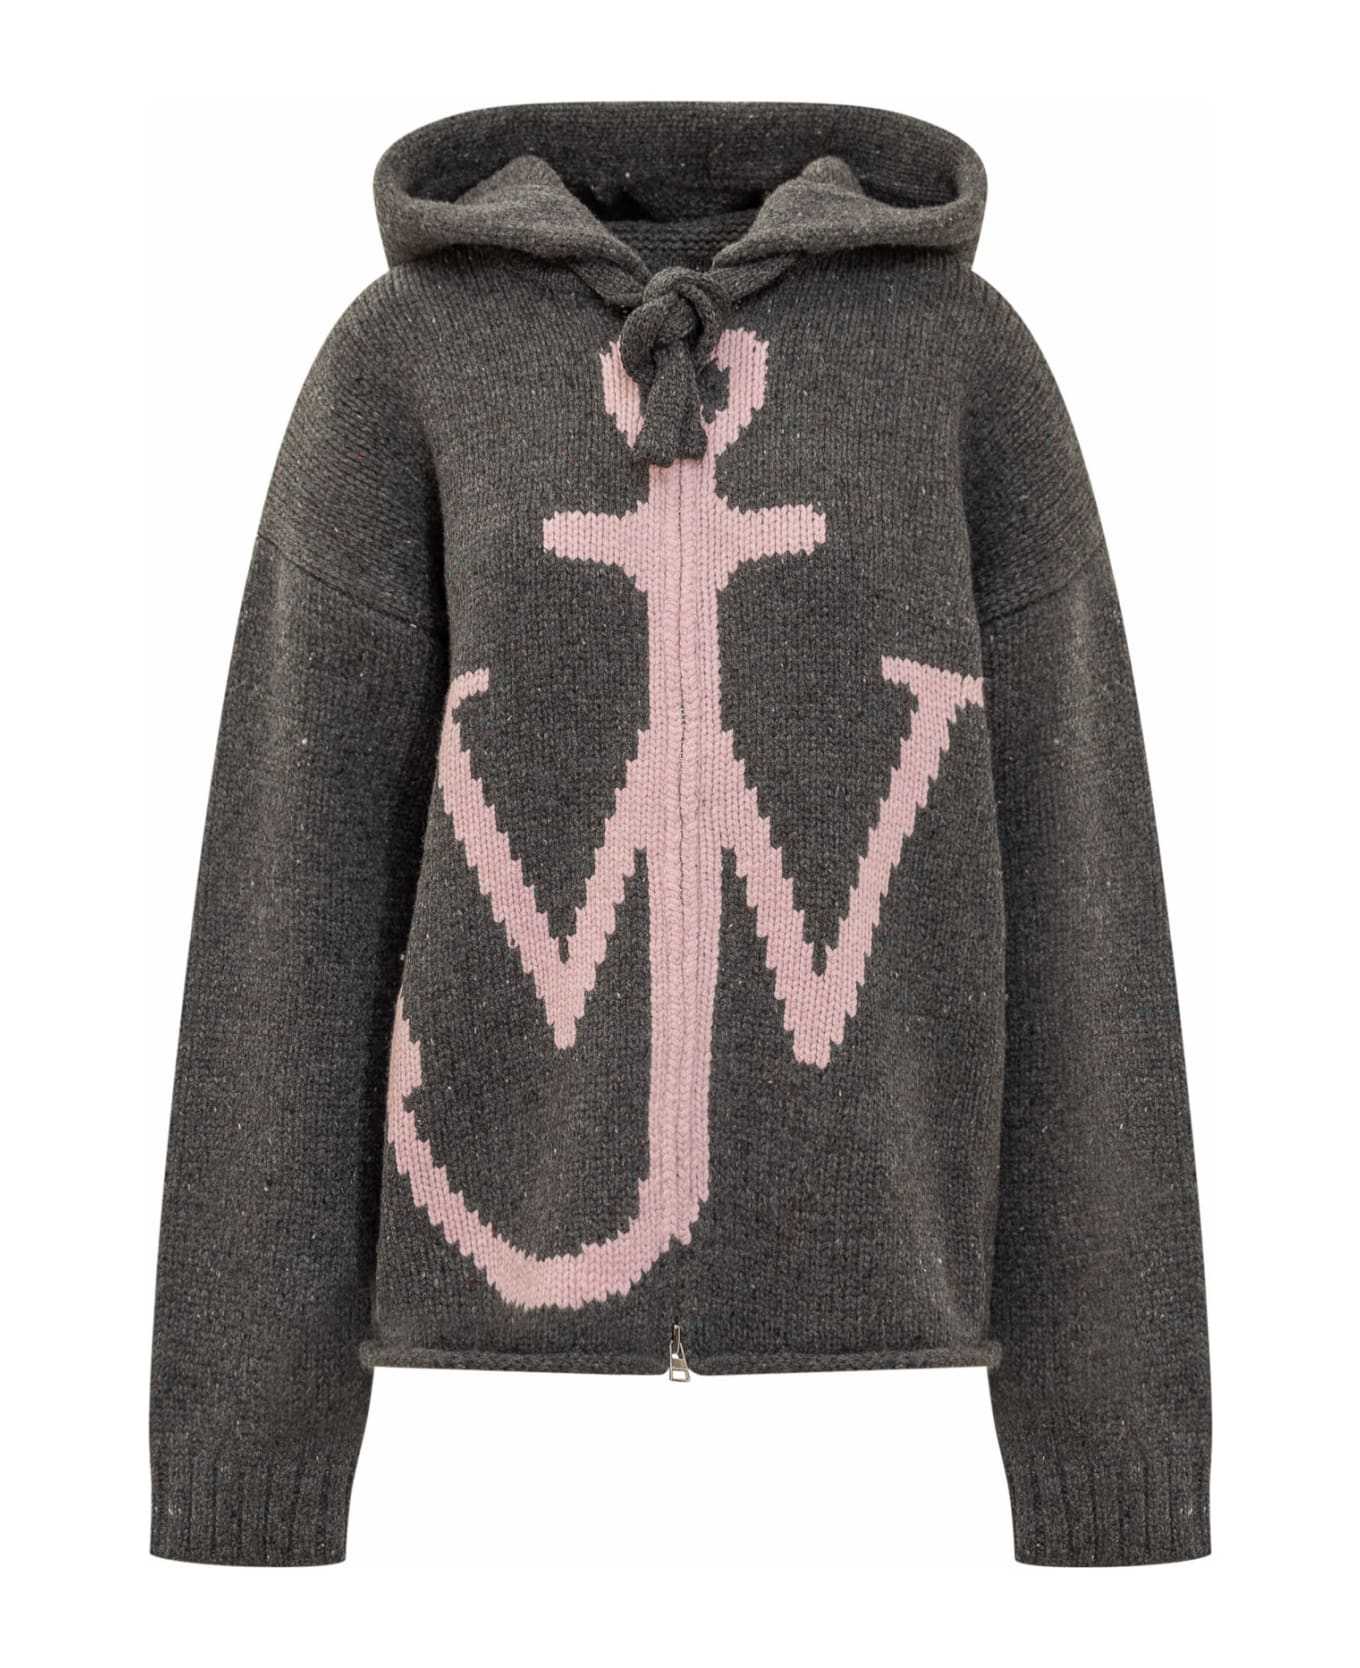 J.W. Anderson Zipped Anchor Hoodie - CHARCOAL